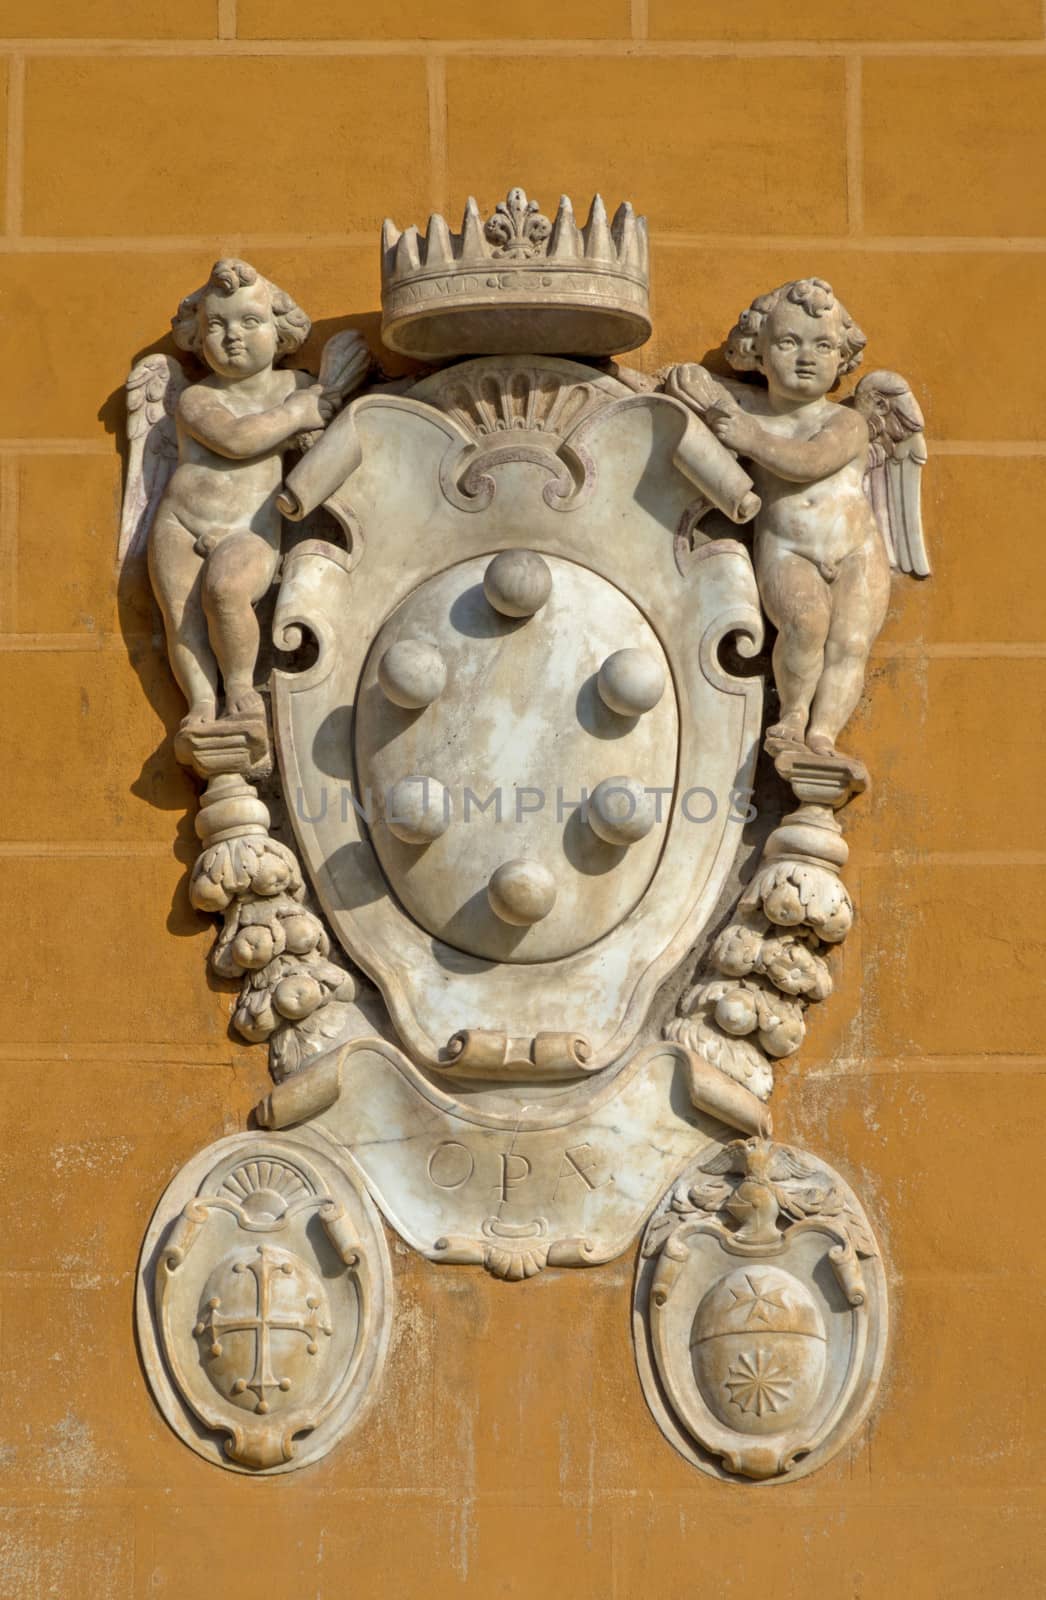 The Medici family embleme on a wall of Miracle's Place in Pisa